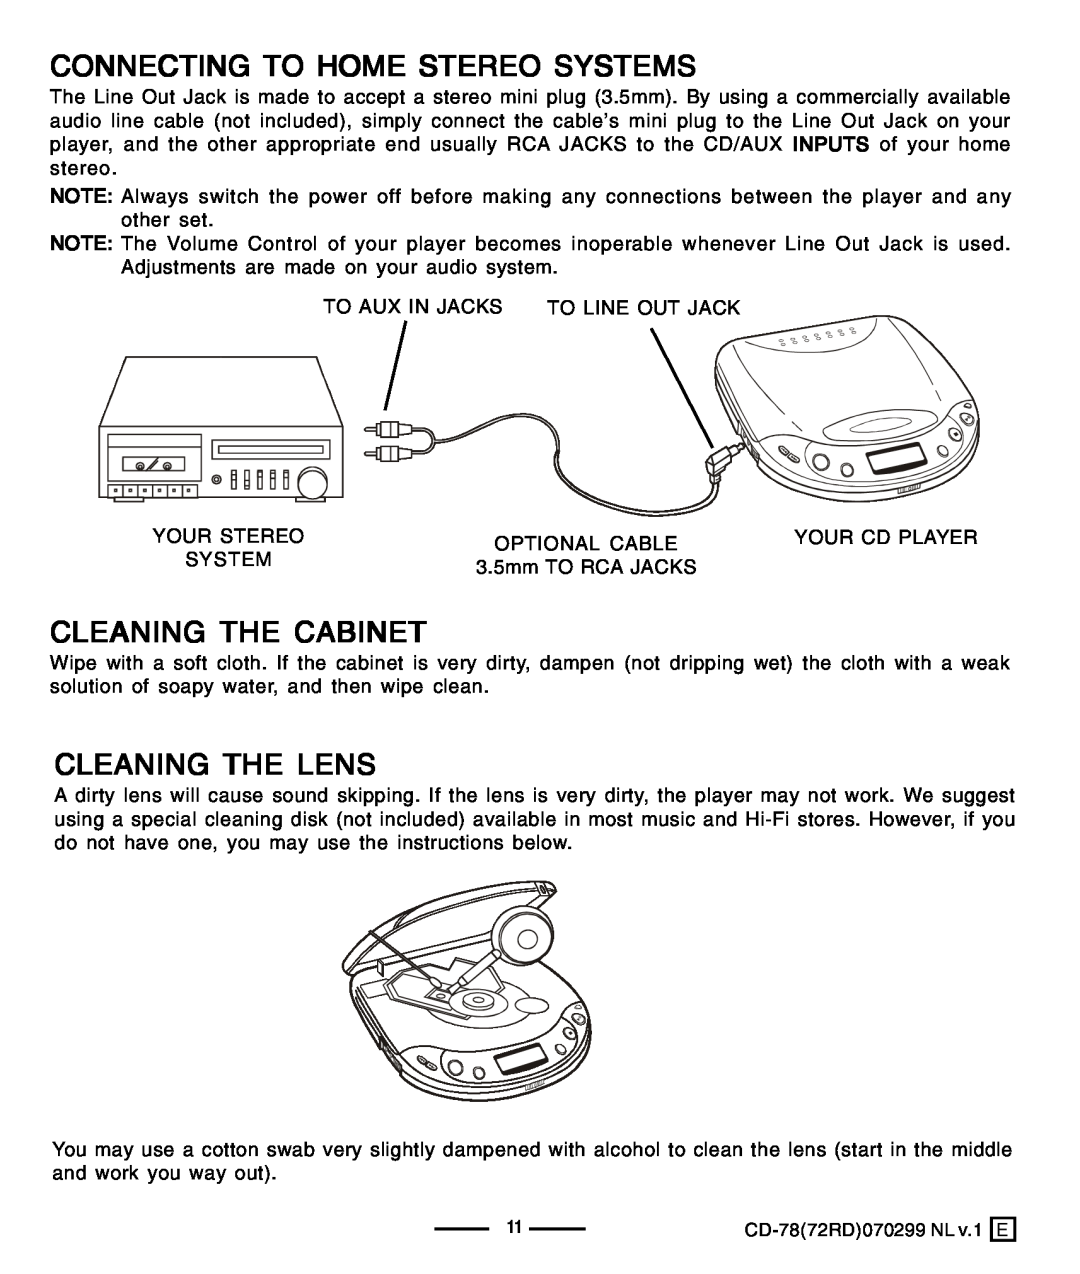 Lenoxx Electronics CD-78 operating instructions Connecting To Home Stereo Systems, Cleaning The Cabinet, Cleaning The Lens 